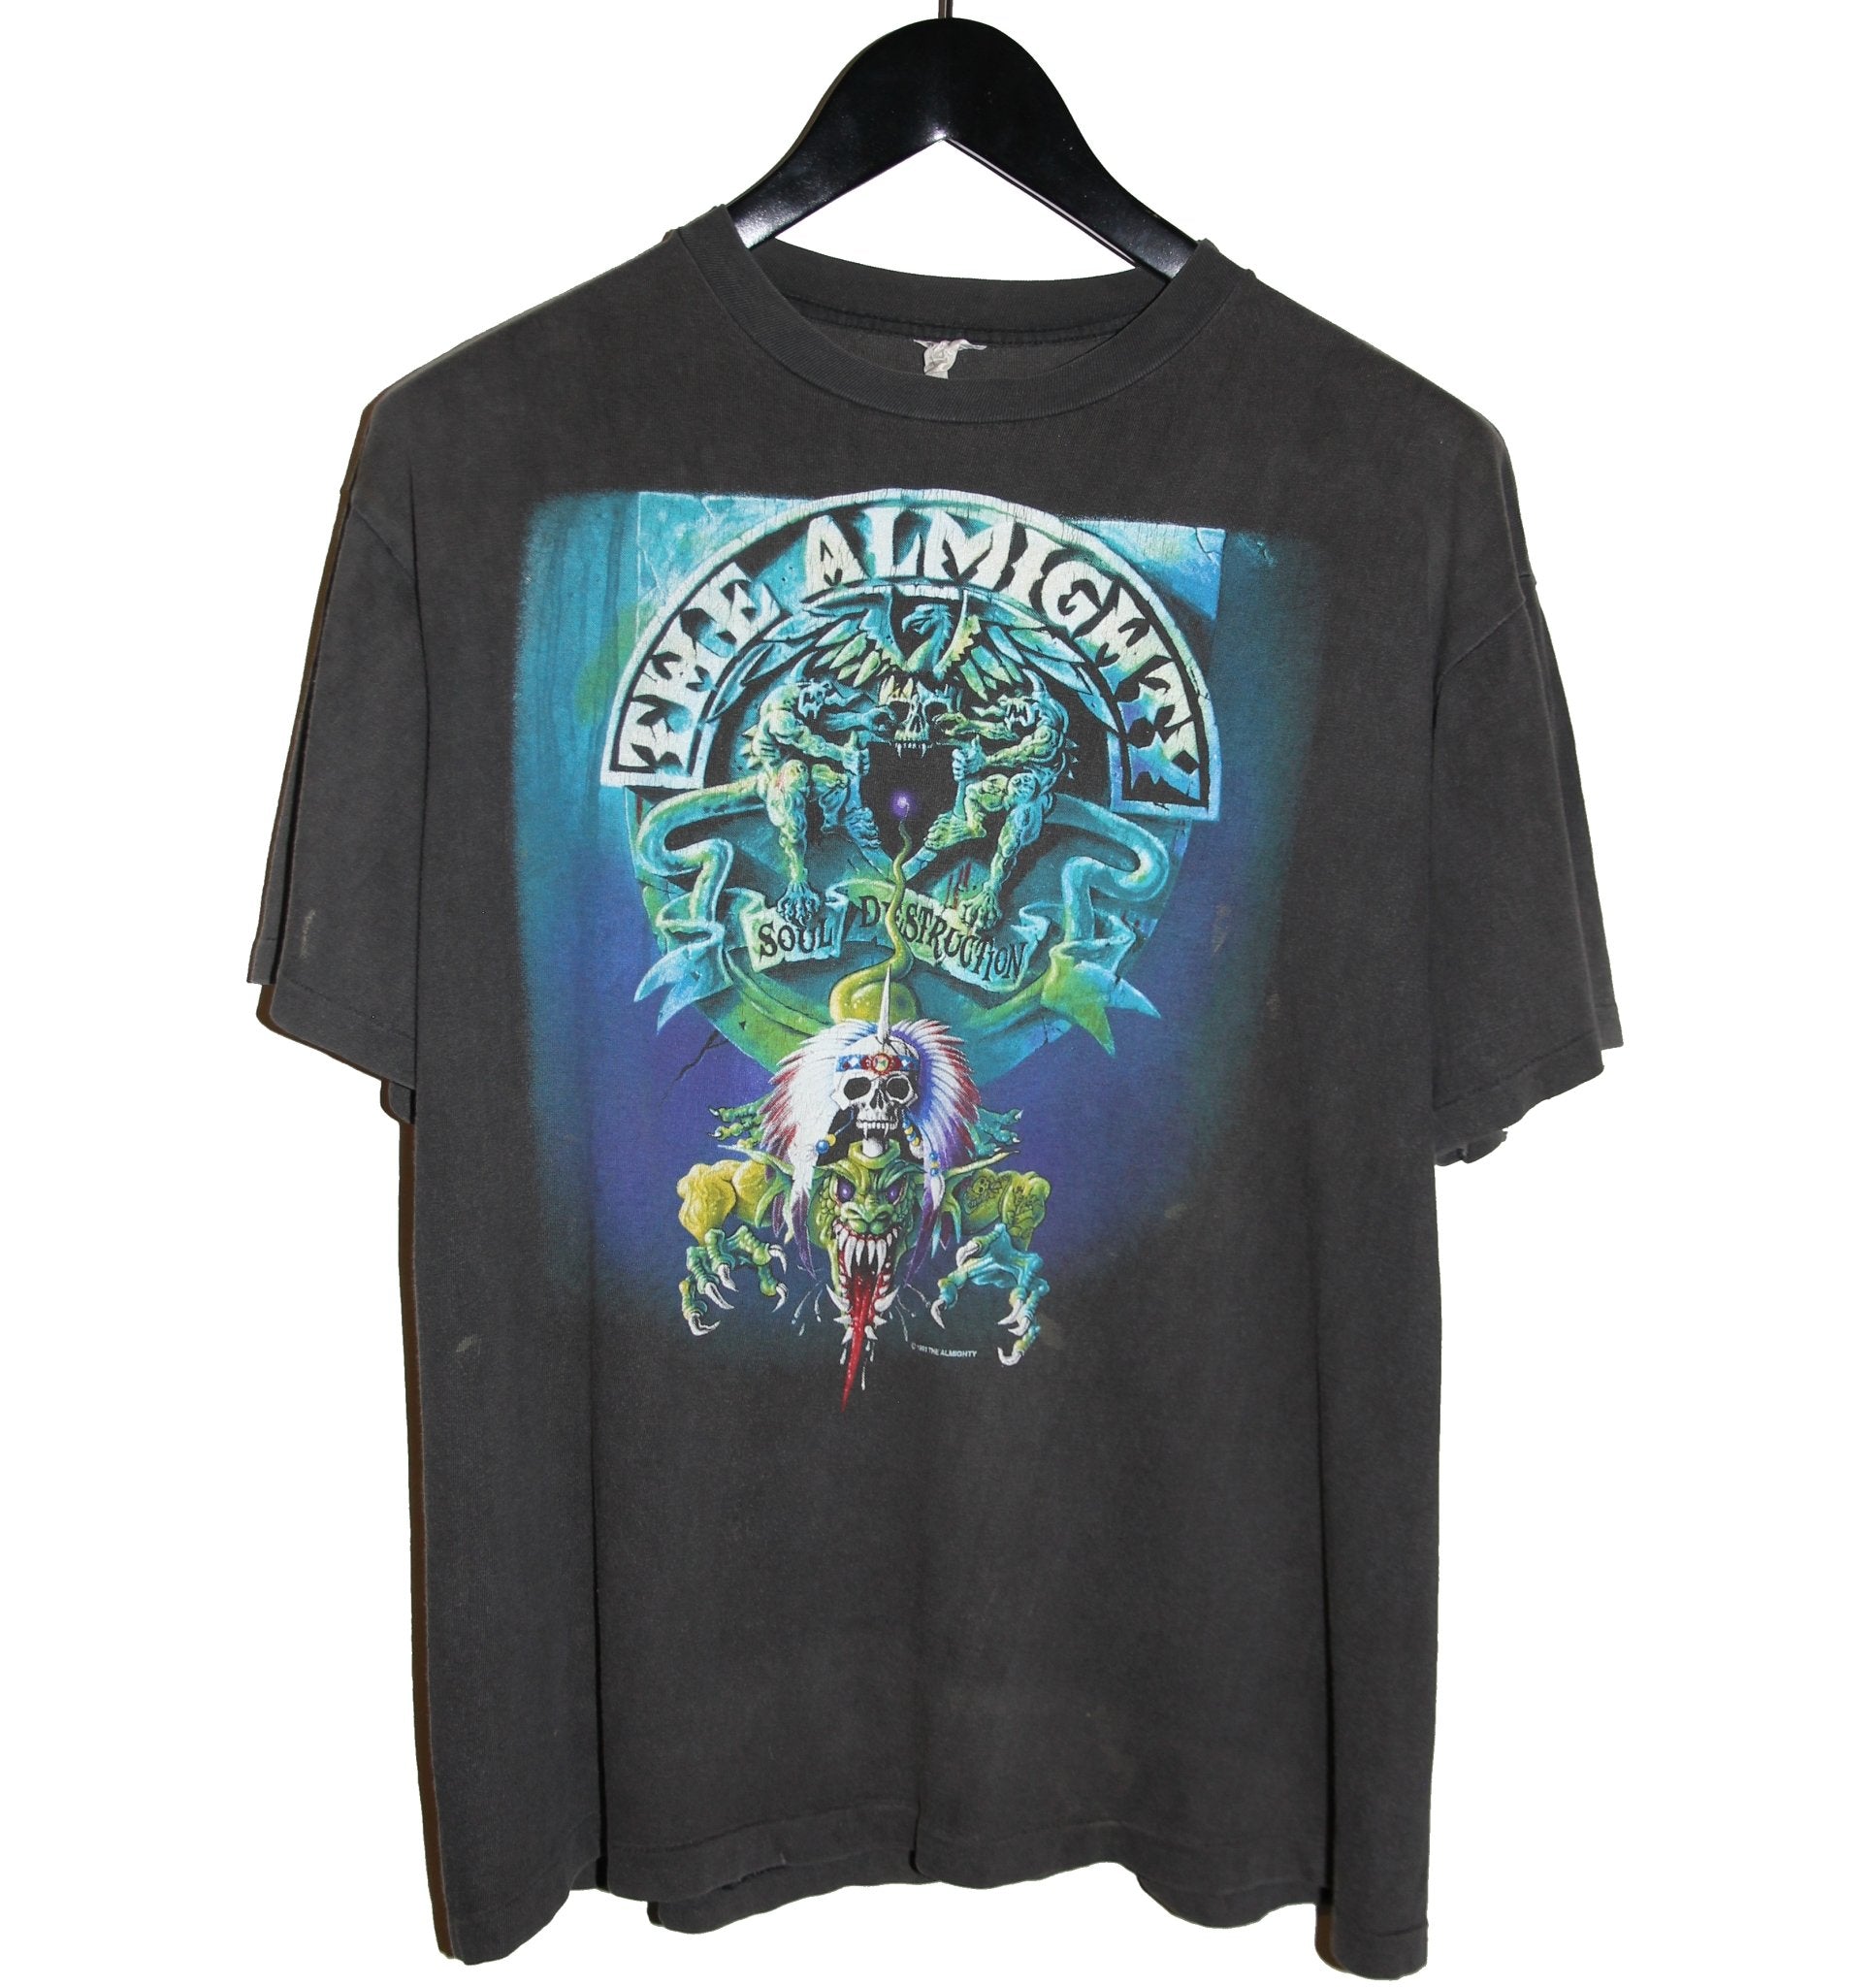 The Almighty 1990 Soul of Destruction Tour Shirt - Faded AU